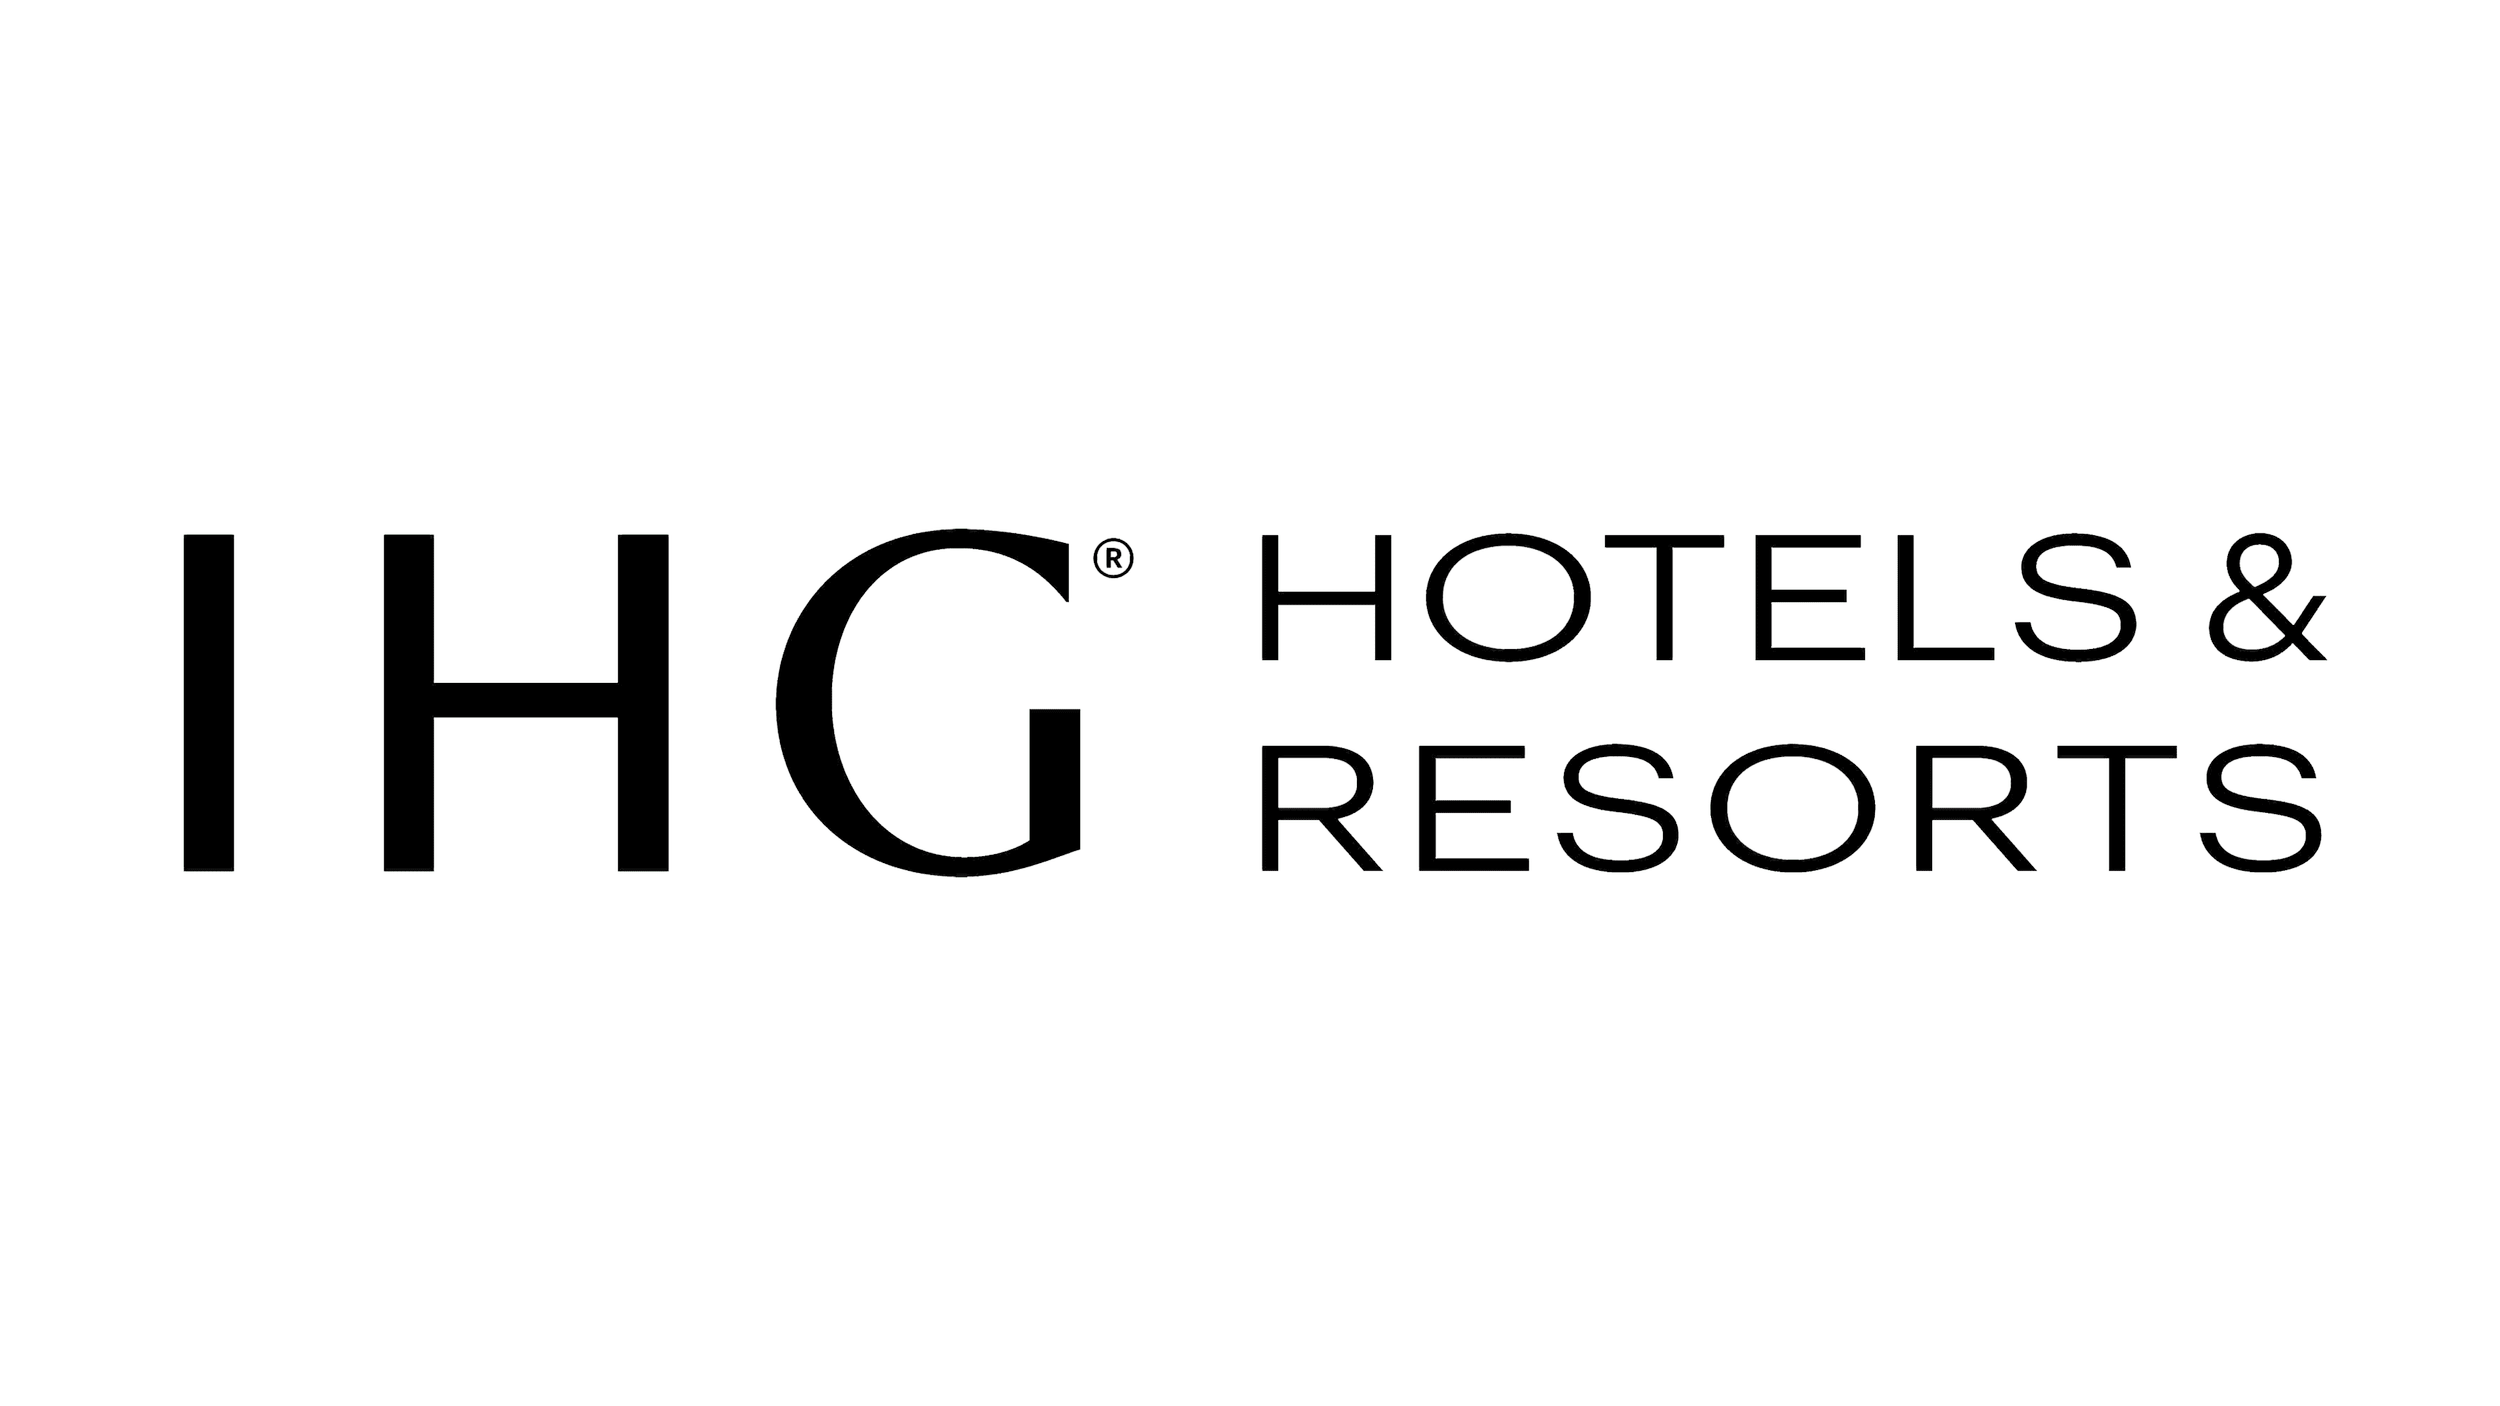 InterContinental-Hotels-Group-Logо.png